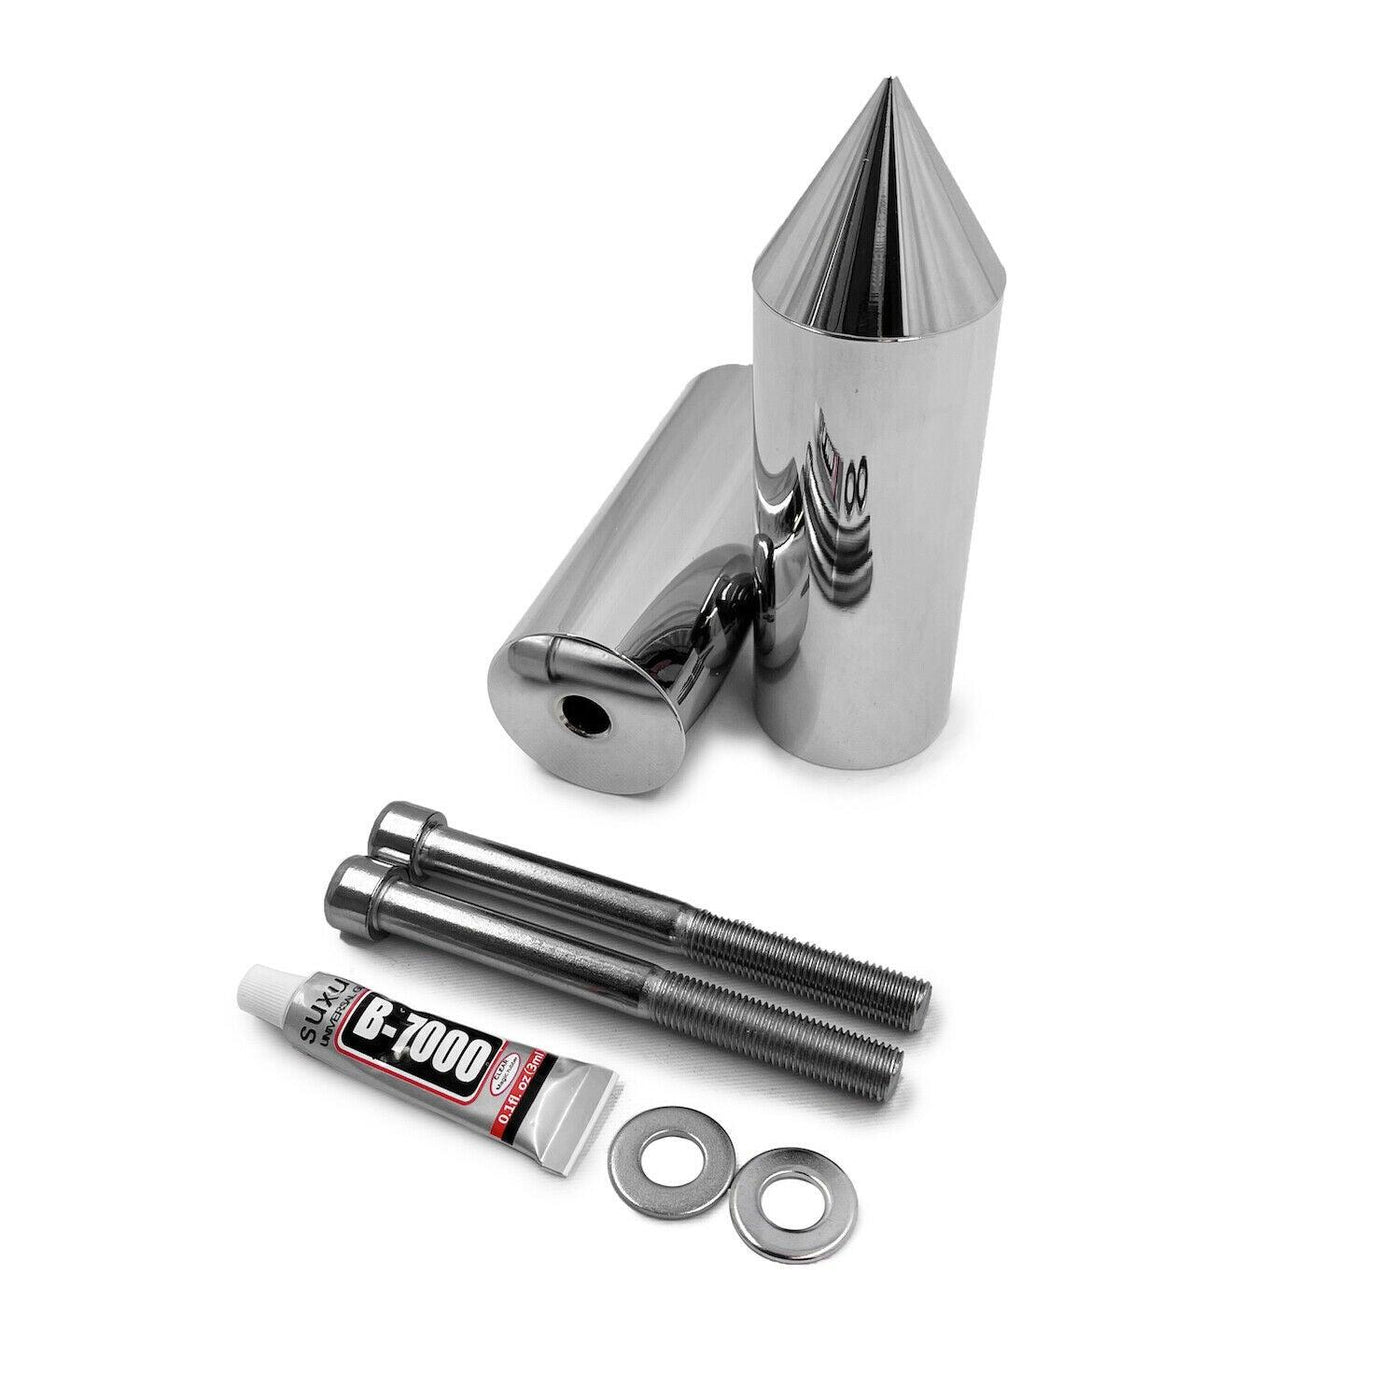 Chrome Extended Spike Frame Sliders Crash Protect For 91-98 Honda CBR 600 F2 F3 - Moto Life Products